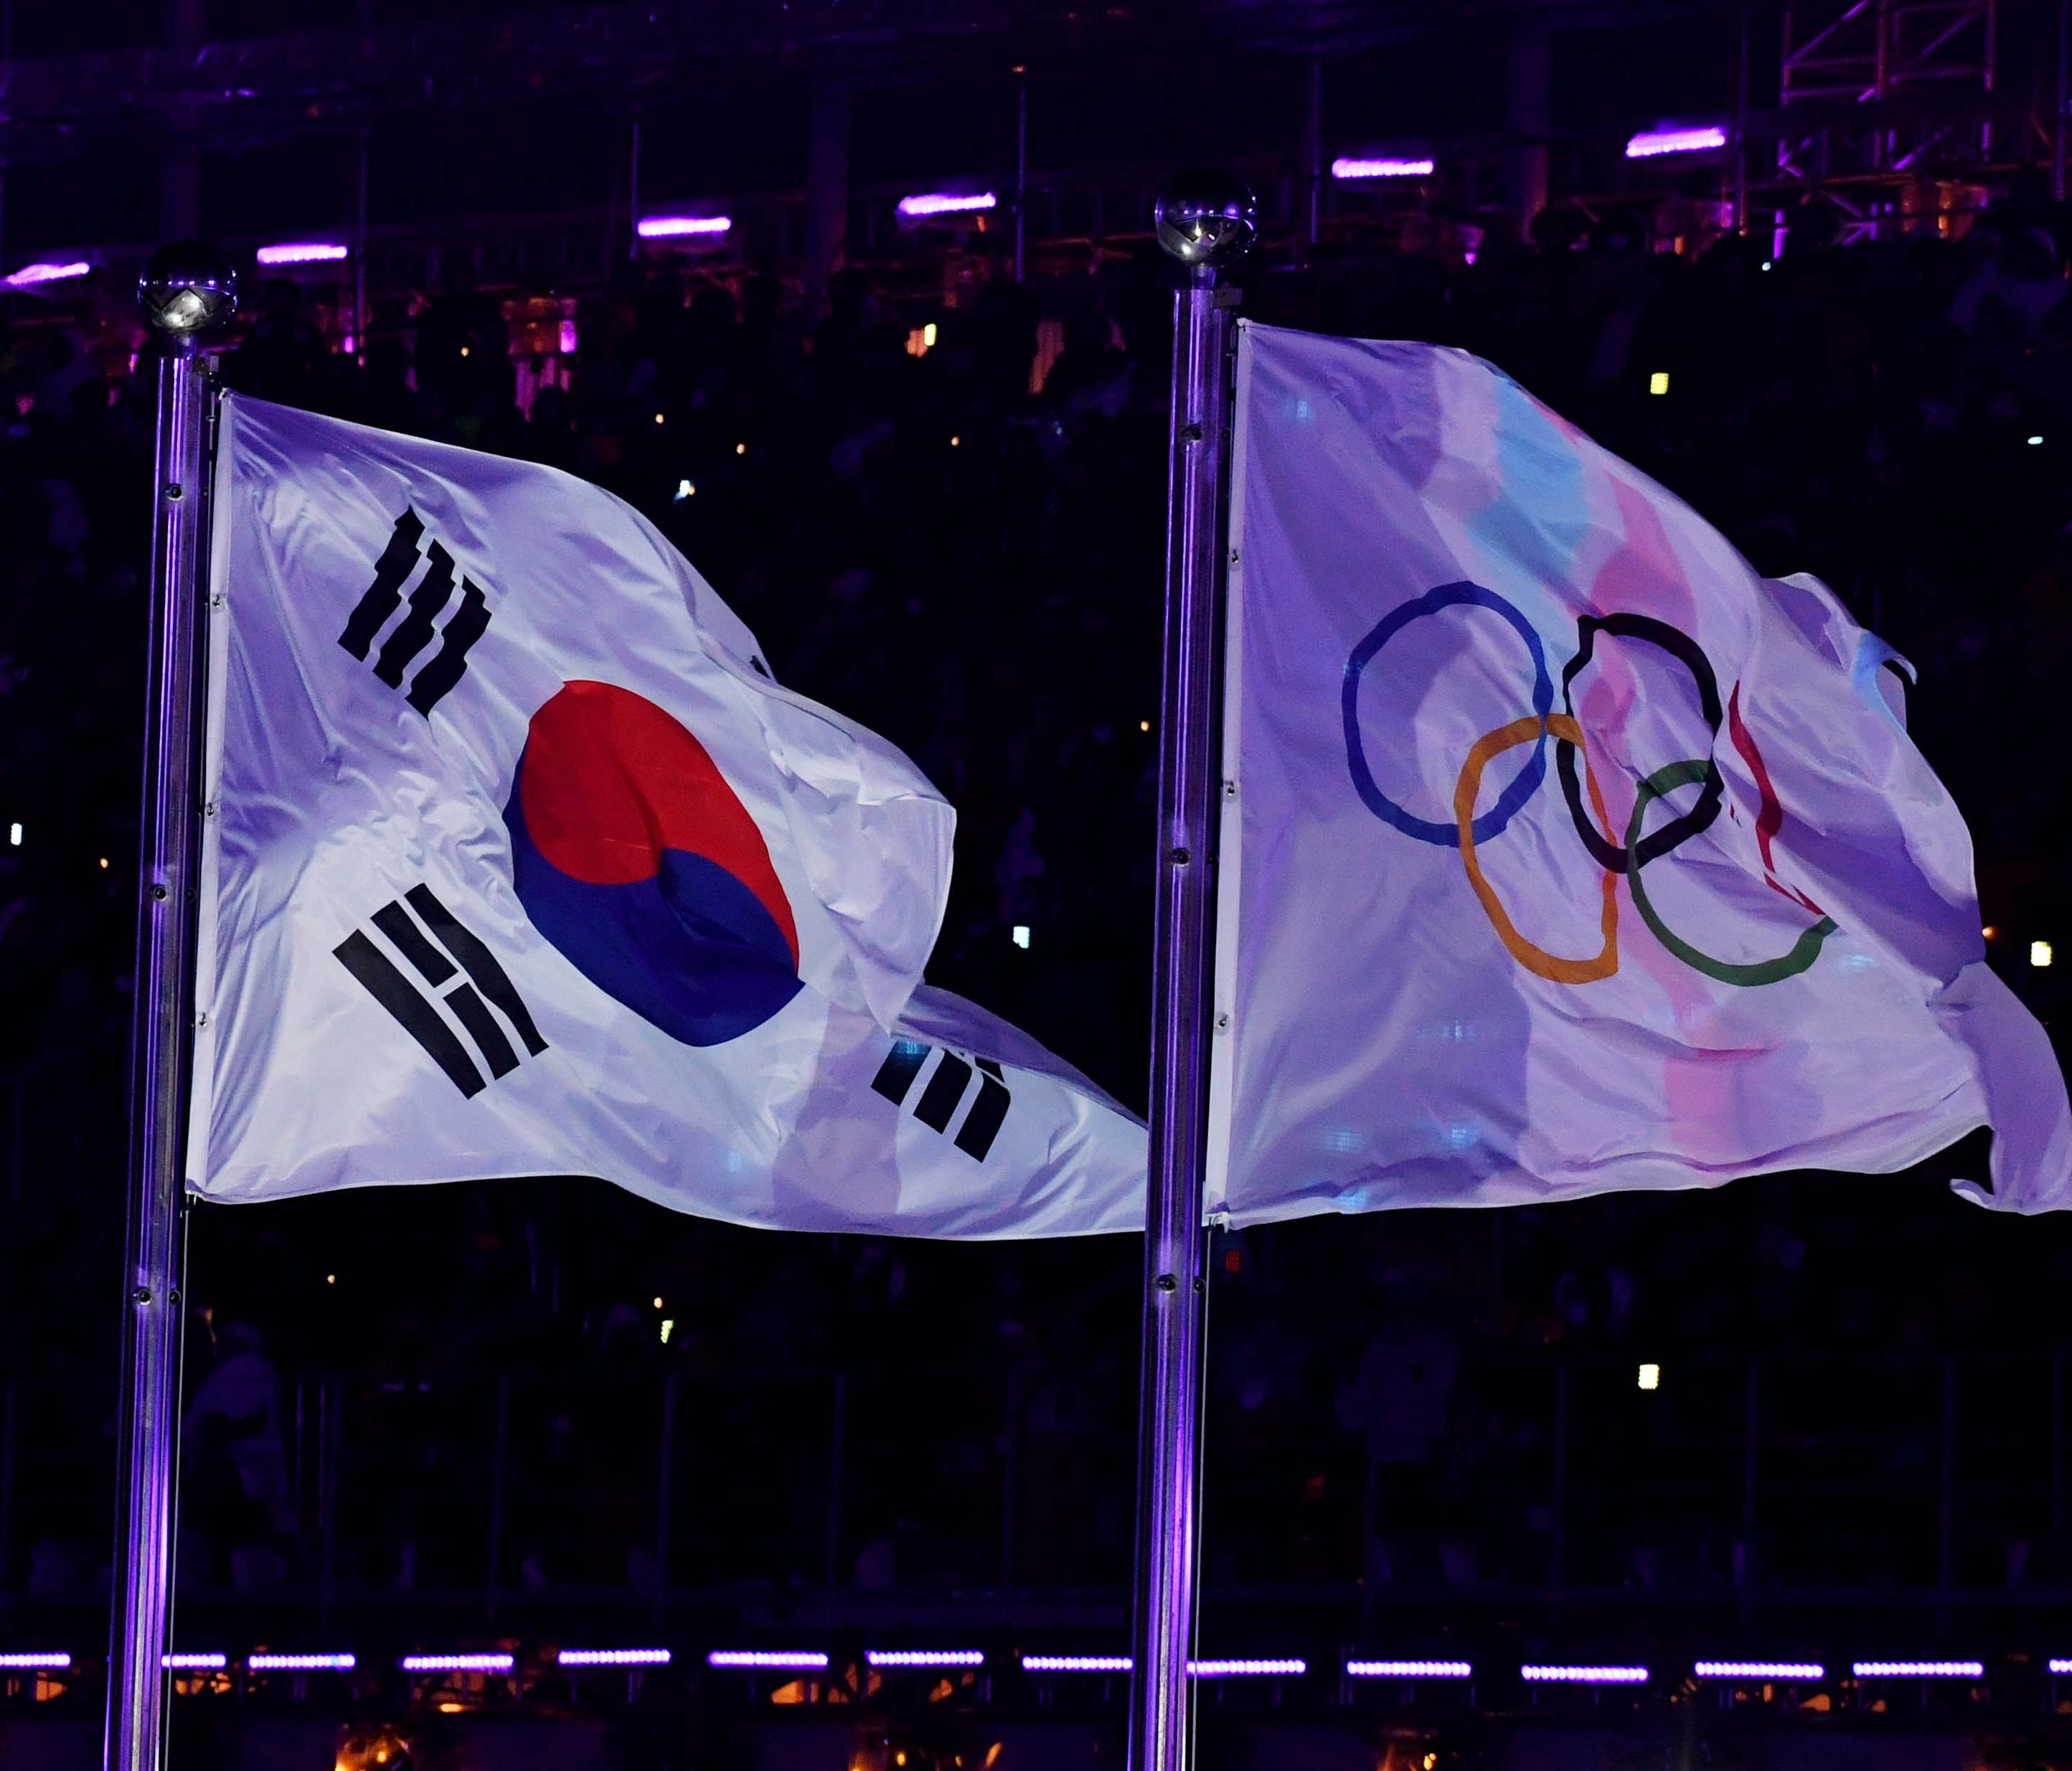 The Olympics flag is raised during the Opening Ceremony for the Pyeongchang 2018 Olympic Winter Games.